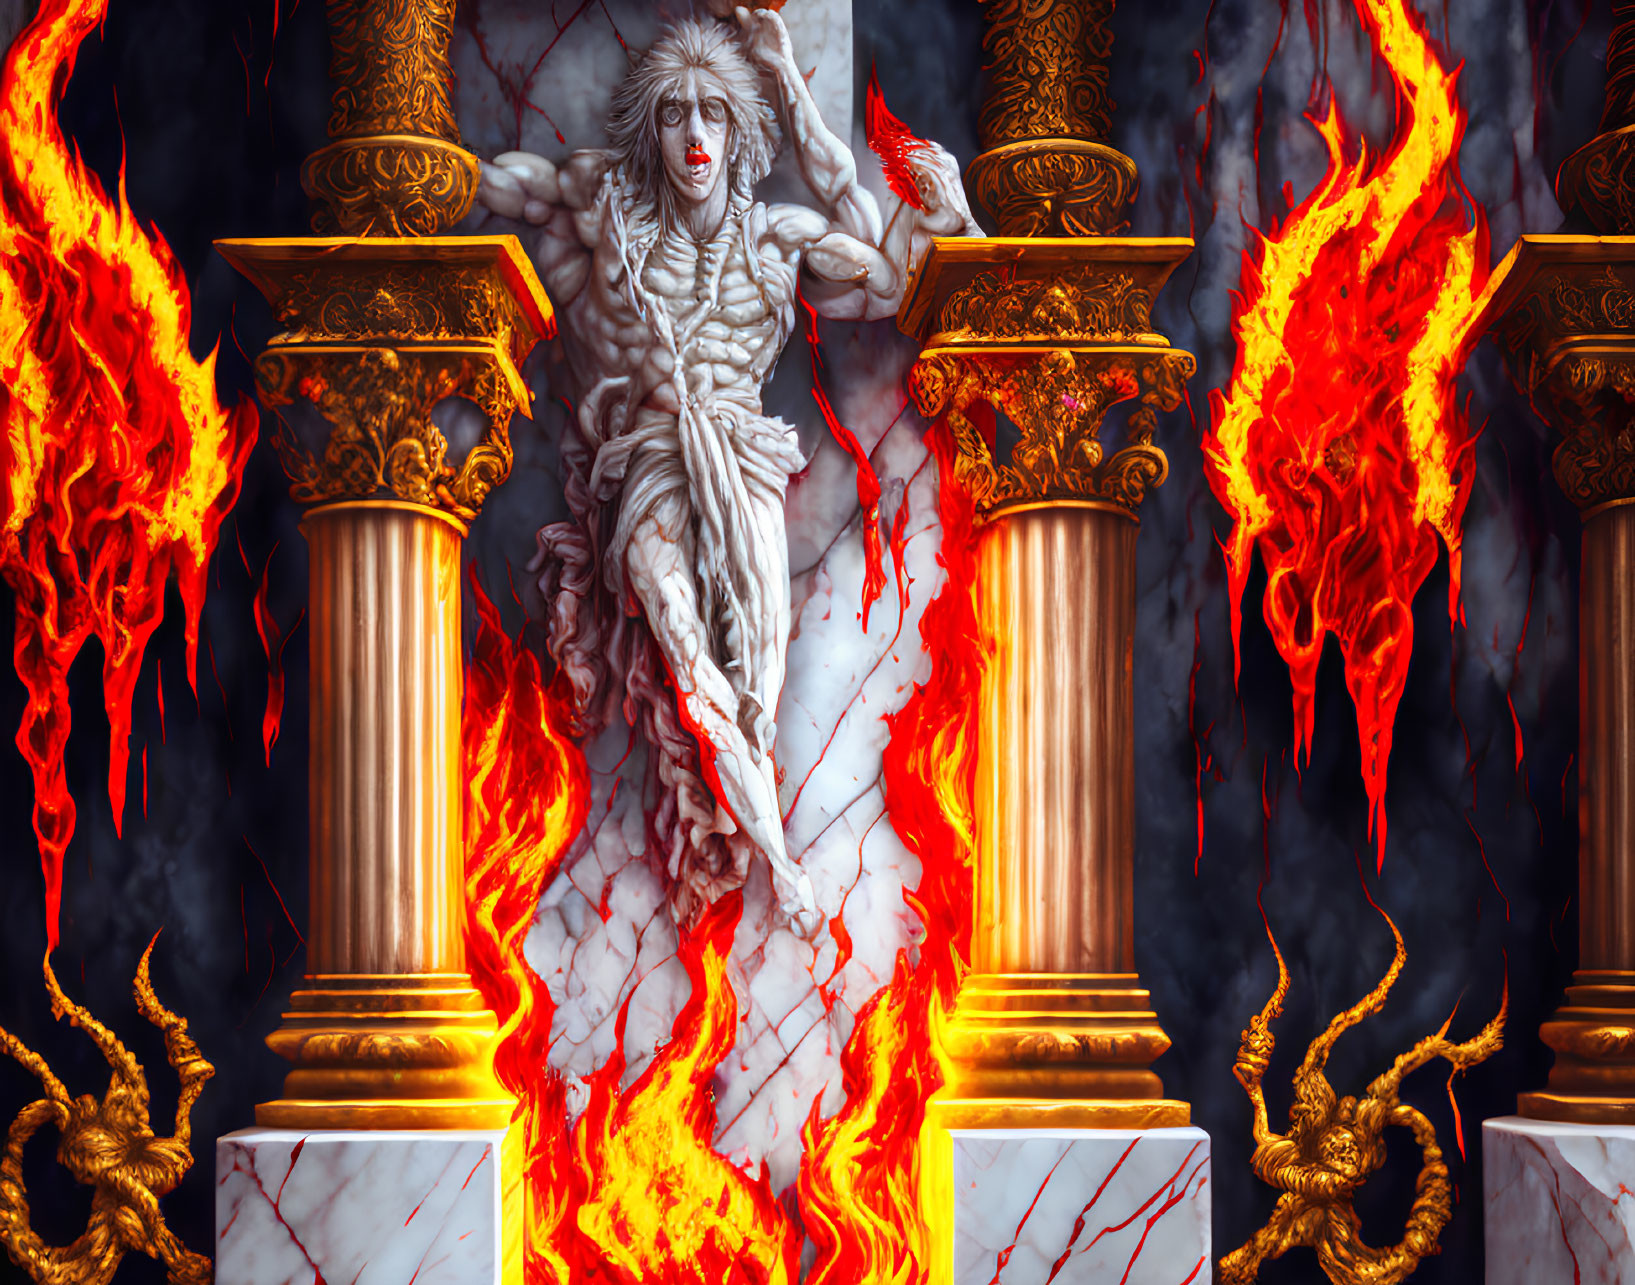 Stone-like mythical figure with white hair and blindfold in fiery fantasy scene